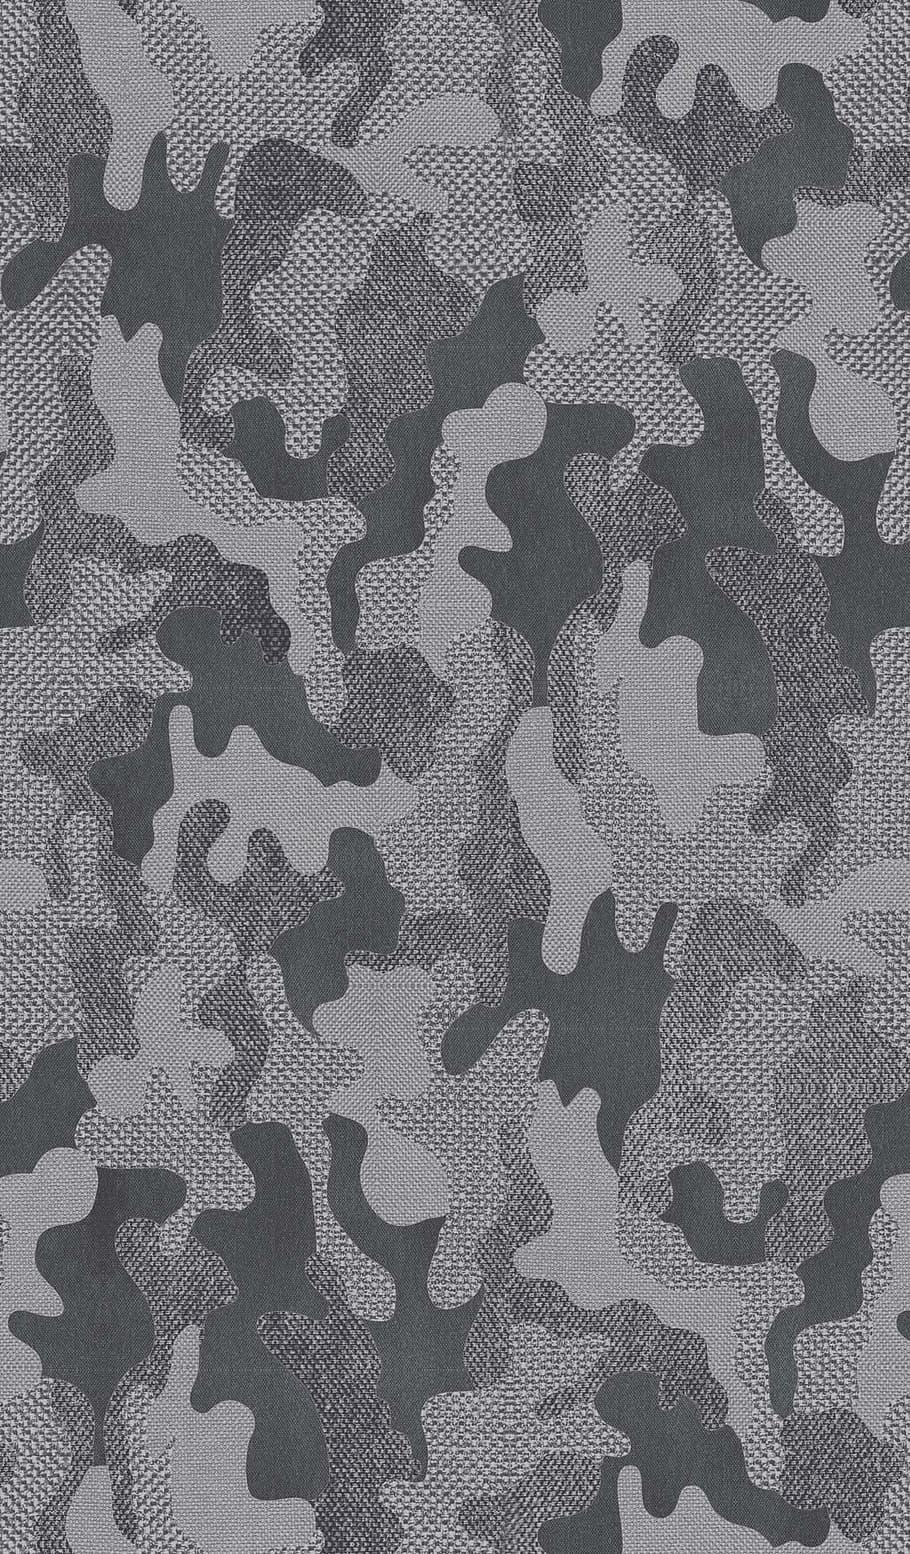 linen, camo, fabric, backgrounds, full frame, pattern, indoors, close-up, textile, textured